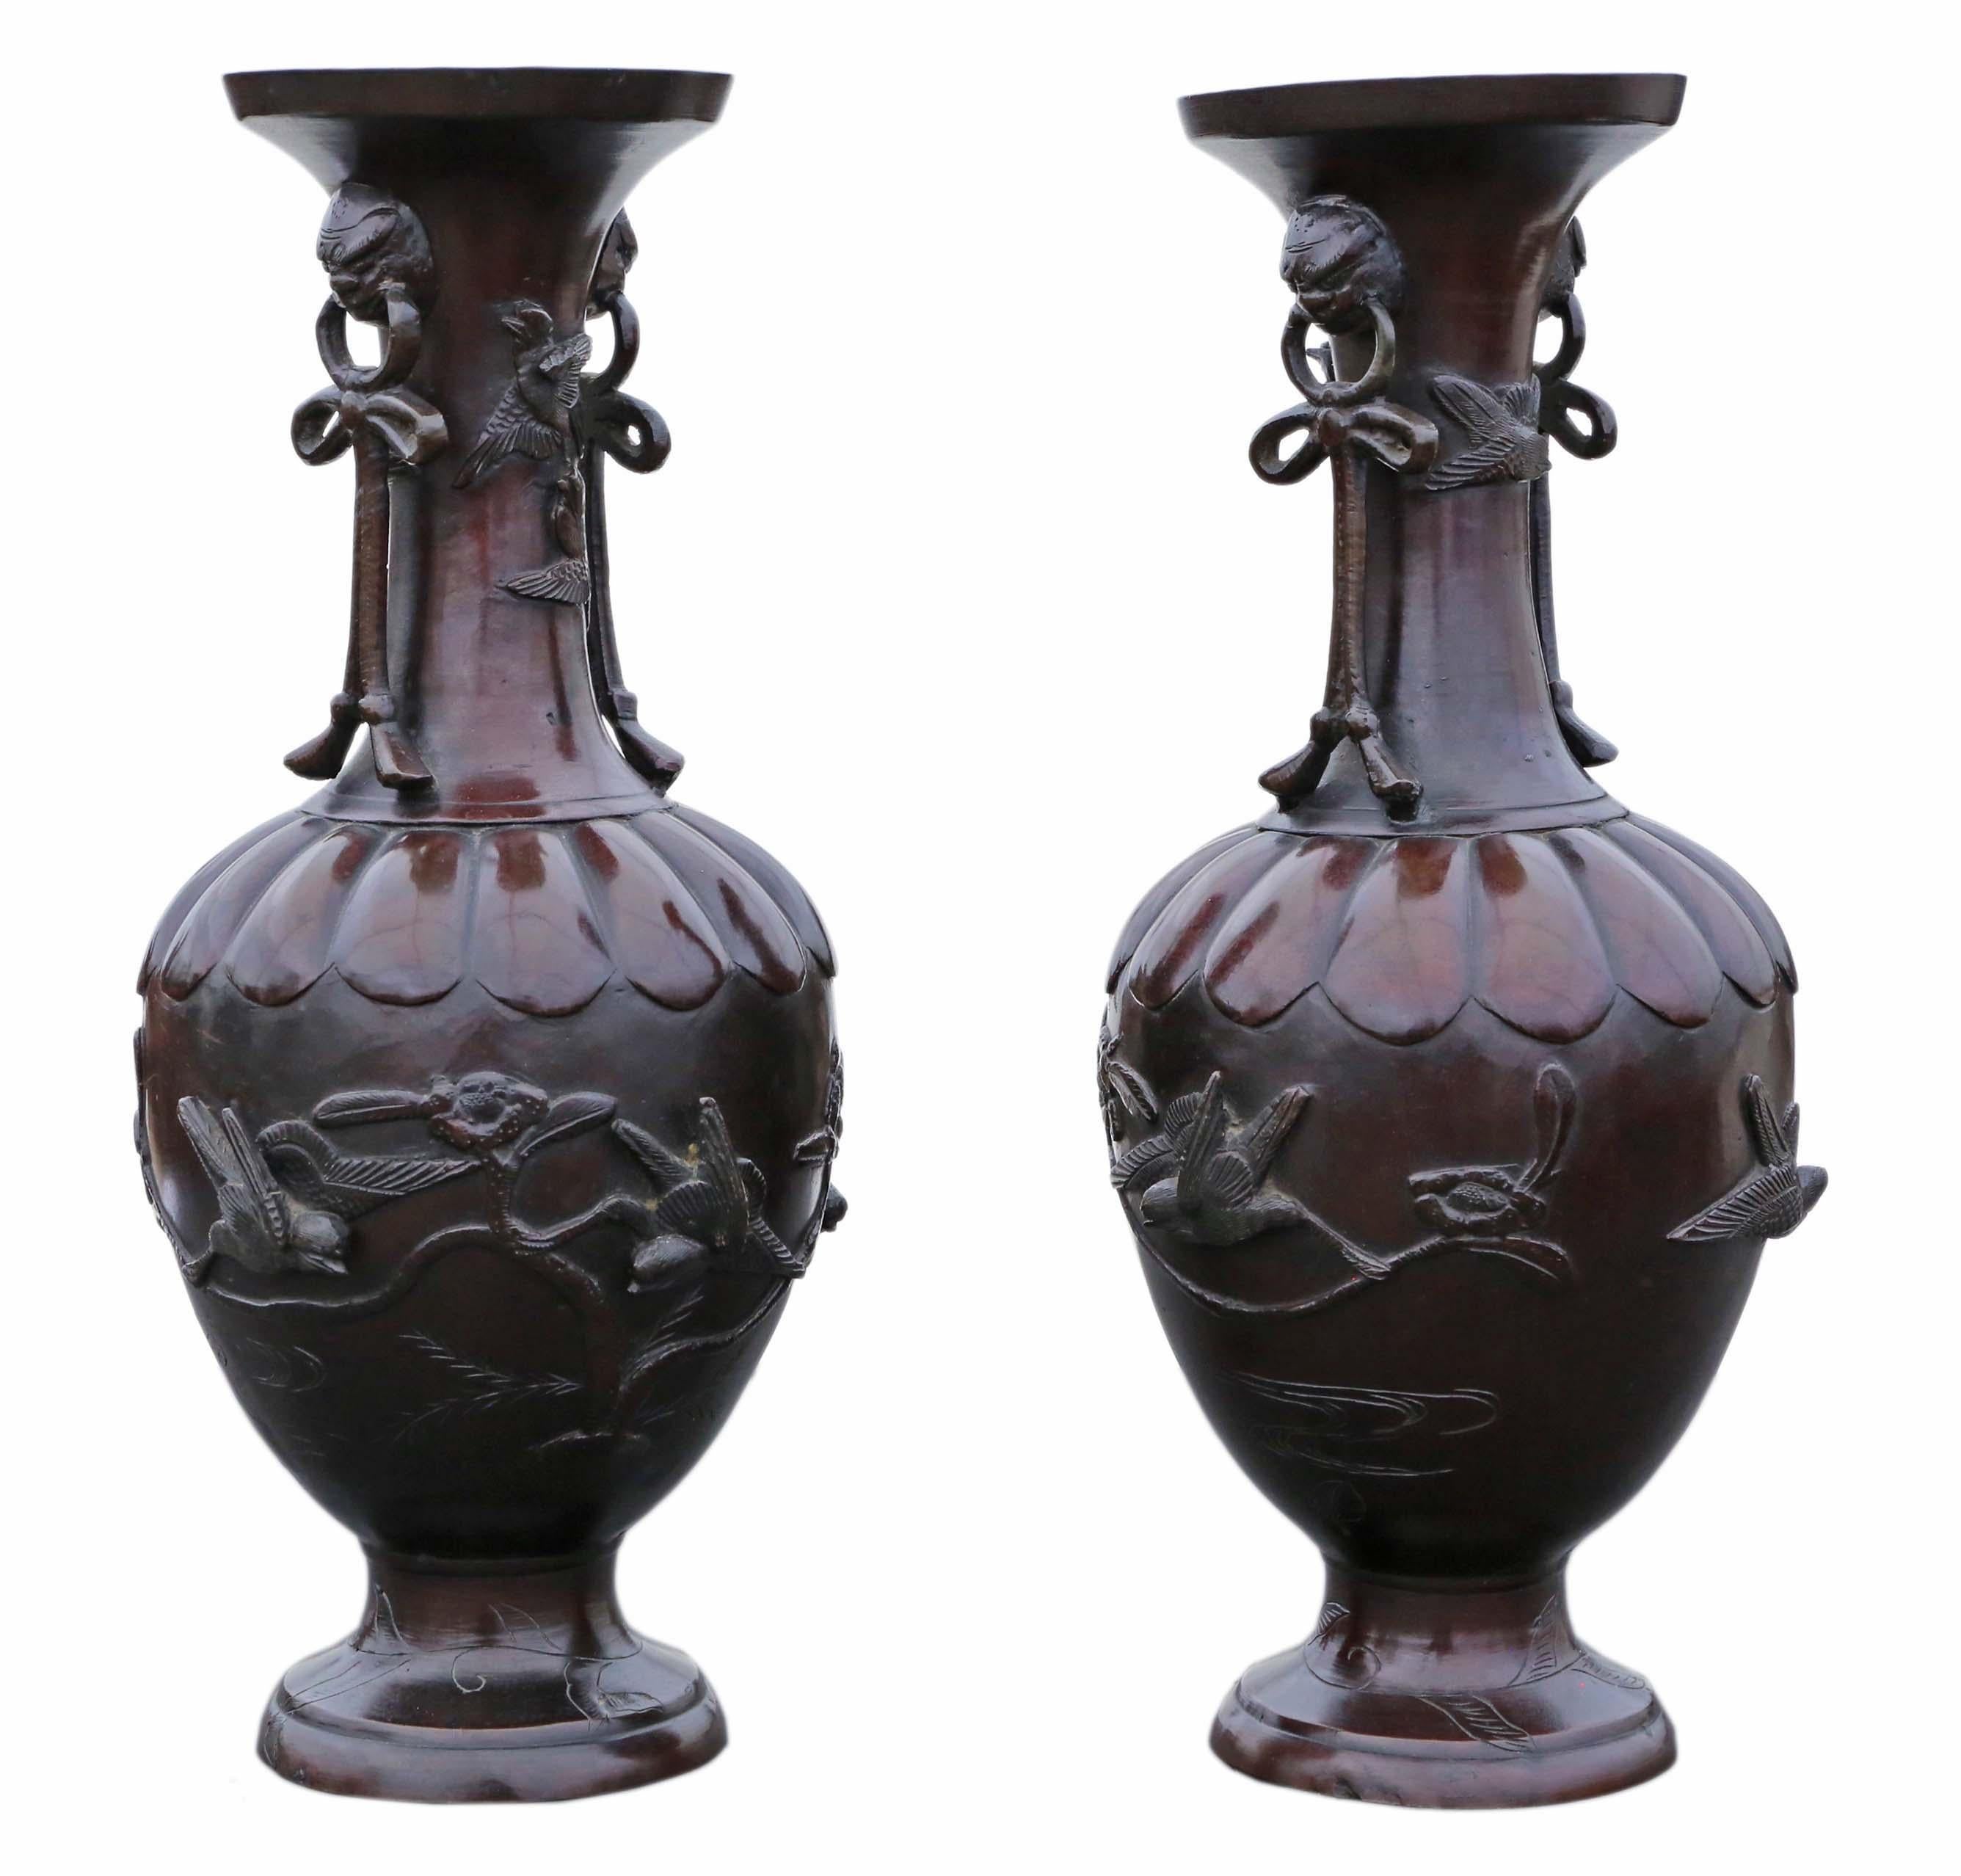 Large Pair of Fine Quality Japanese Bronze Vases Dated 1903 Meiji Period Antique In Good Condition For Sale In Wisbech, Cambridgeshire